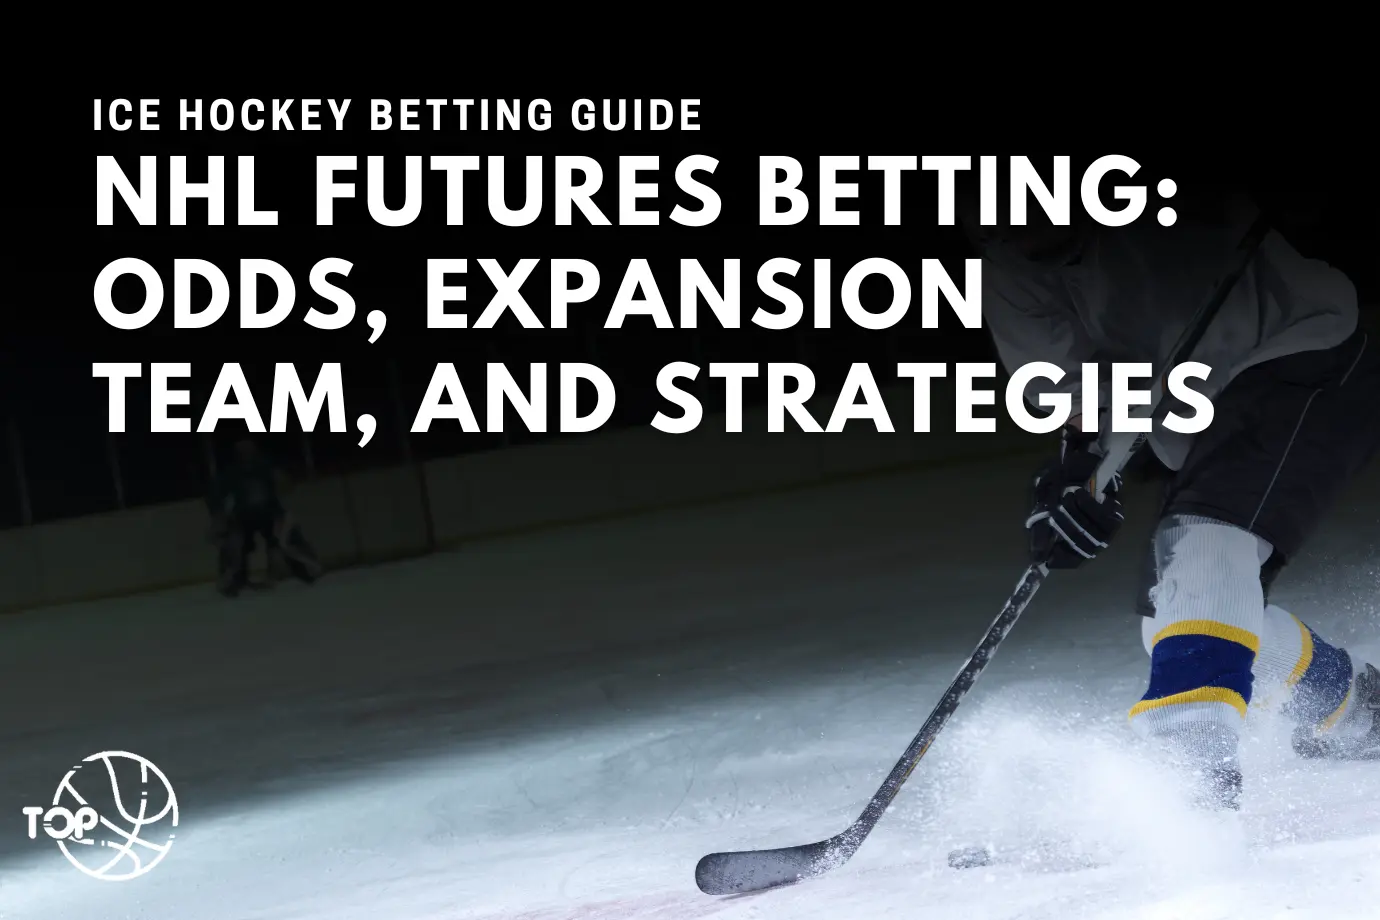 NHL Futures Betting: Odds, Expansion Team, and Strategies